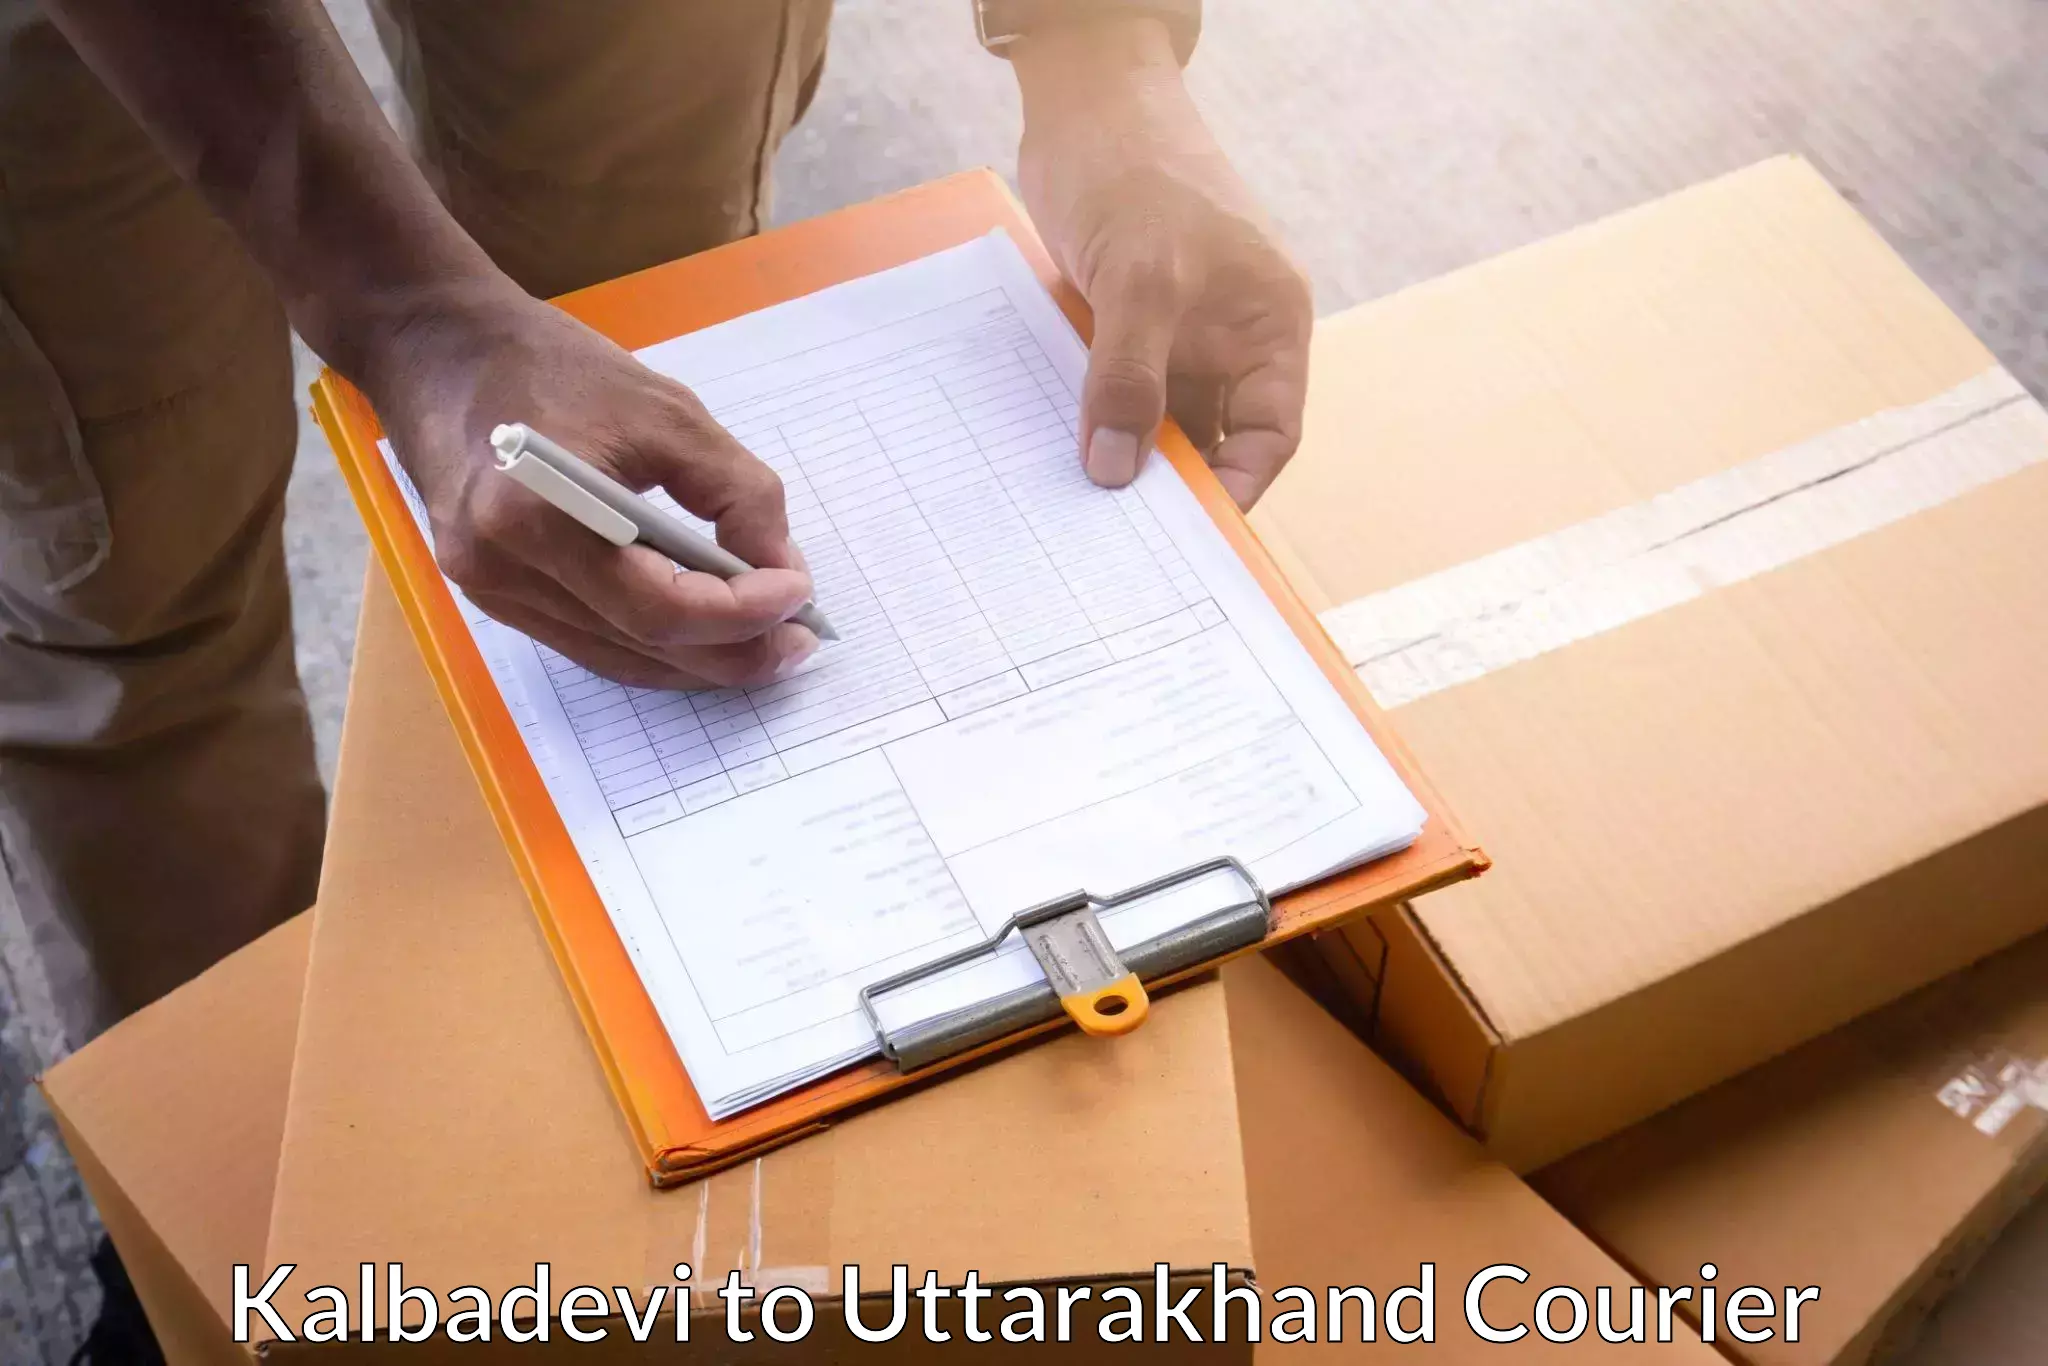 Parcel service for businesses Kalbadevi to Paithani